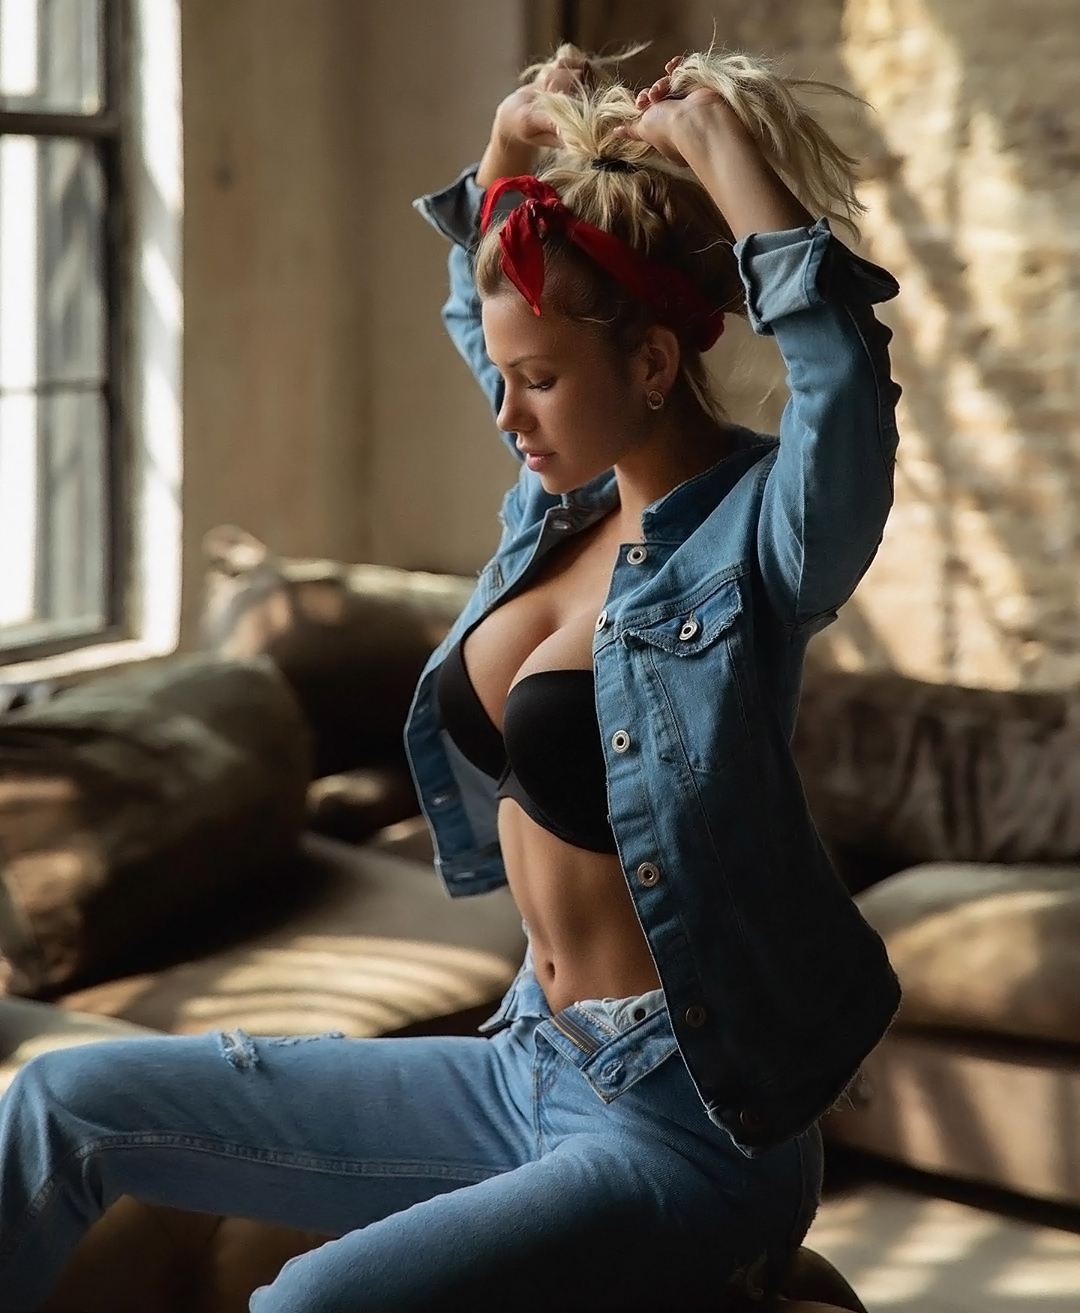 People 1080x1313 Aleksandr Mavrin women Nata Lee blonde hands in hair hair accessories jacket open clothes denim bra lingerie jeans torn clothes cleavage model women indoors black bras arms up